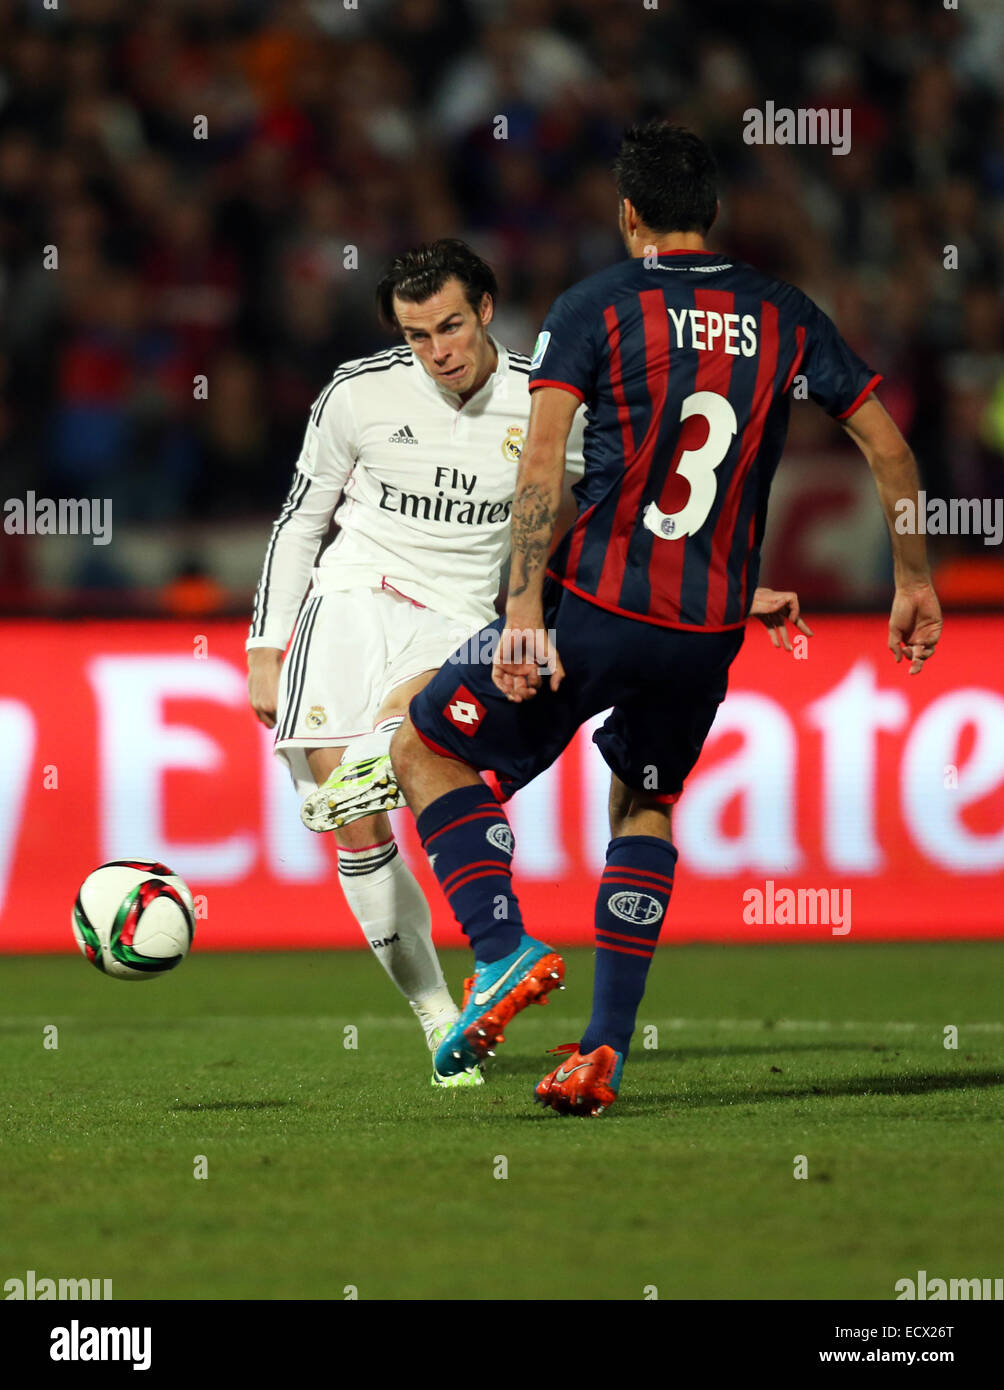 Marrakesh, Morocco. 20th Dec, 2014. FIFA World Club Cup. Final. Real Madrid versus San Lorenzo. Real Madrid midfielder Gareth Bale (11) shoots and scores the second goal. Credit:  Action Plus Sports/Alamy Live News Stock Photo